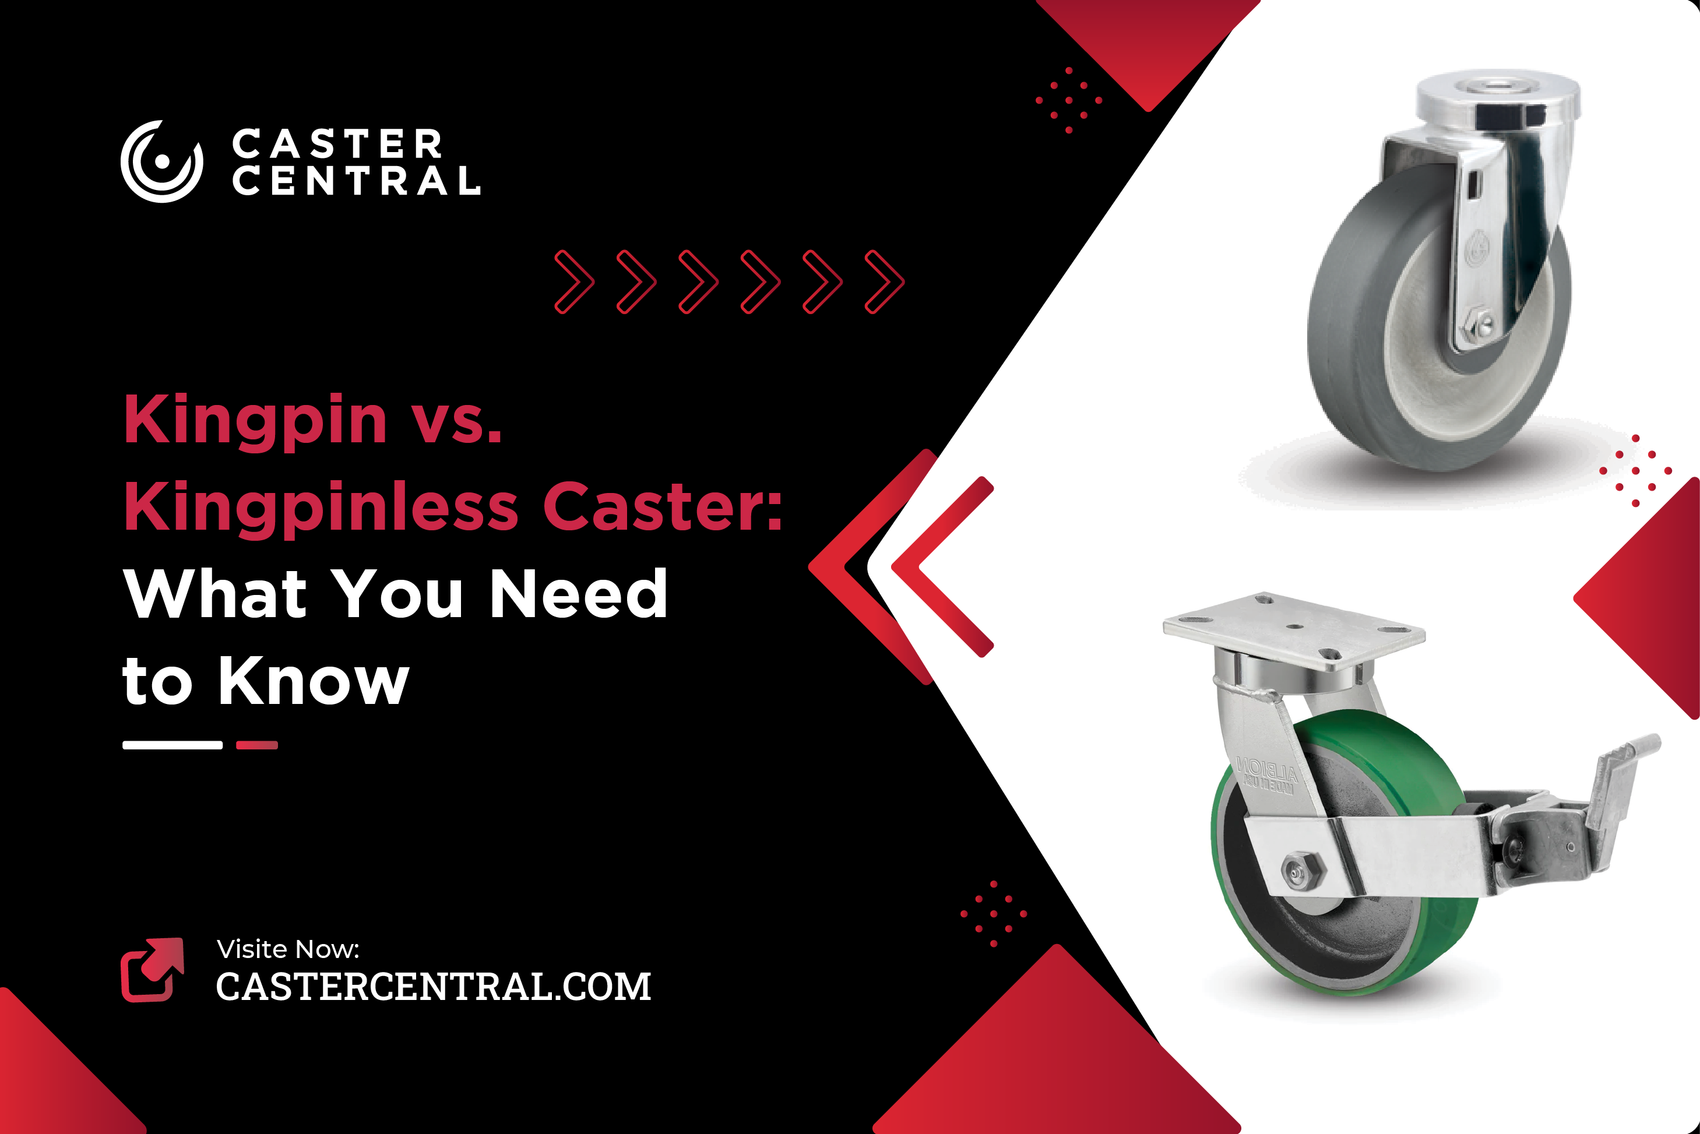 Kingpin vs. Kingpinless Caster: What You Need to Know